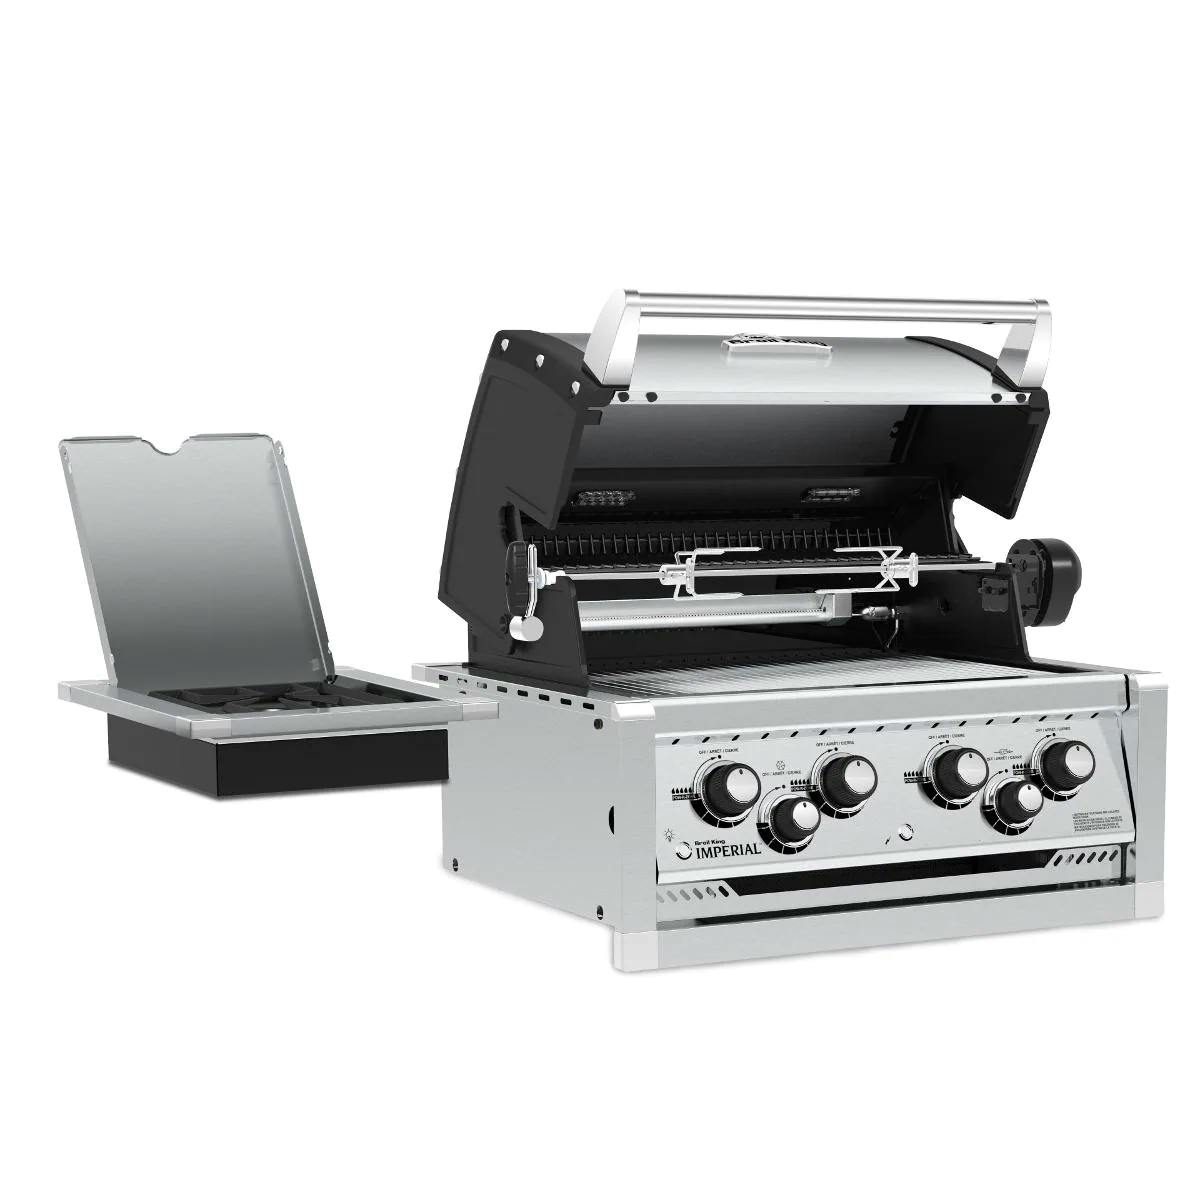 Broil King Imperial 490 Built-in Gas Grill with Rotisserie & Side Burner